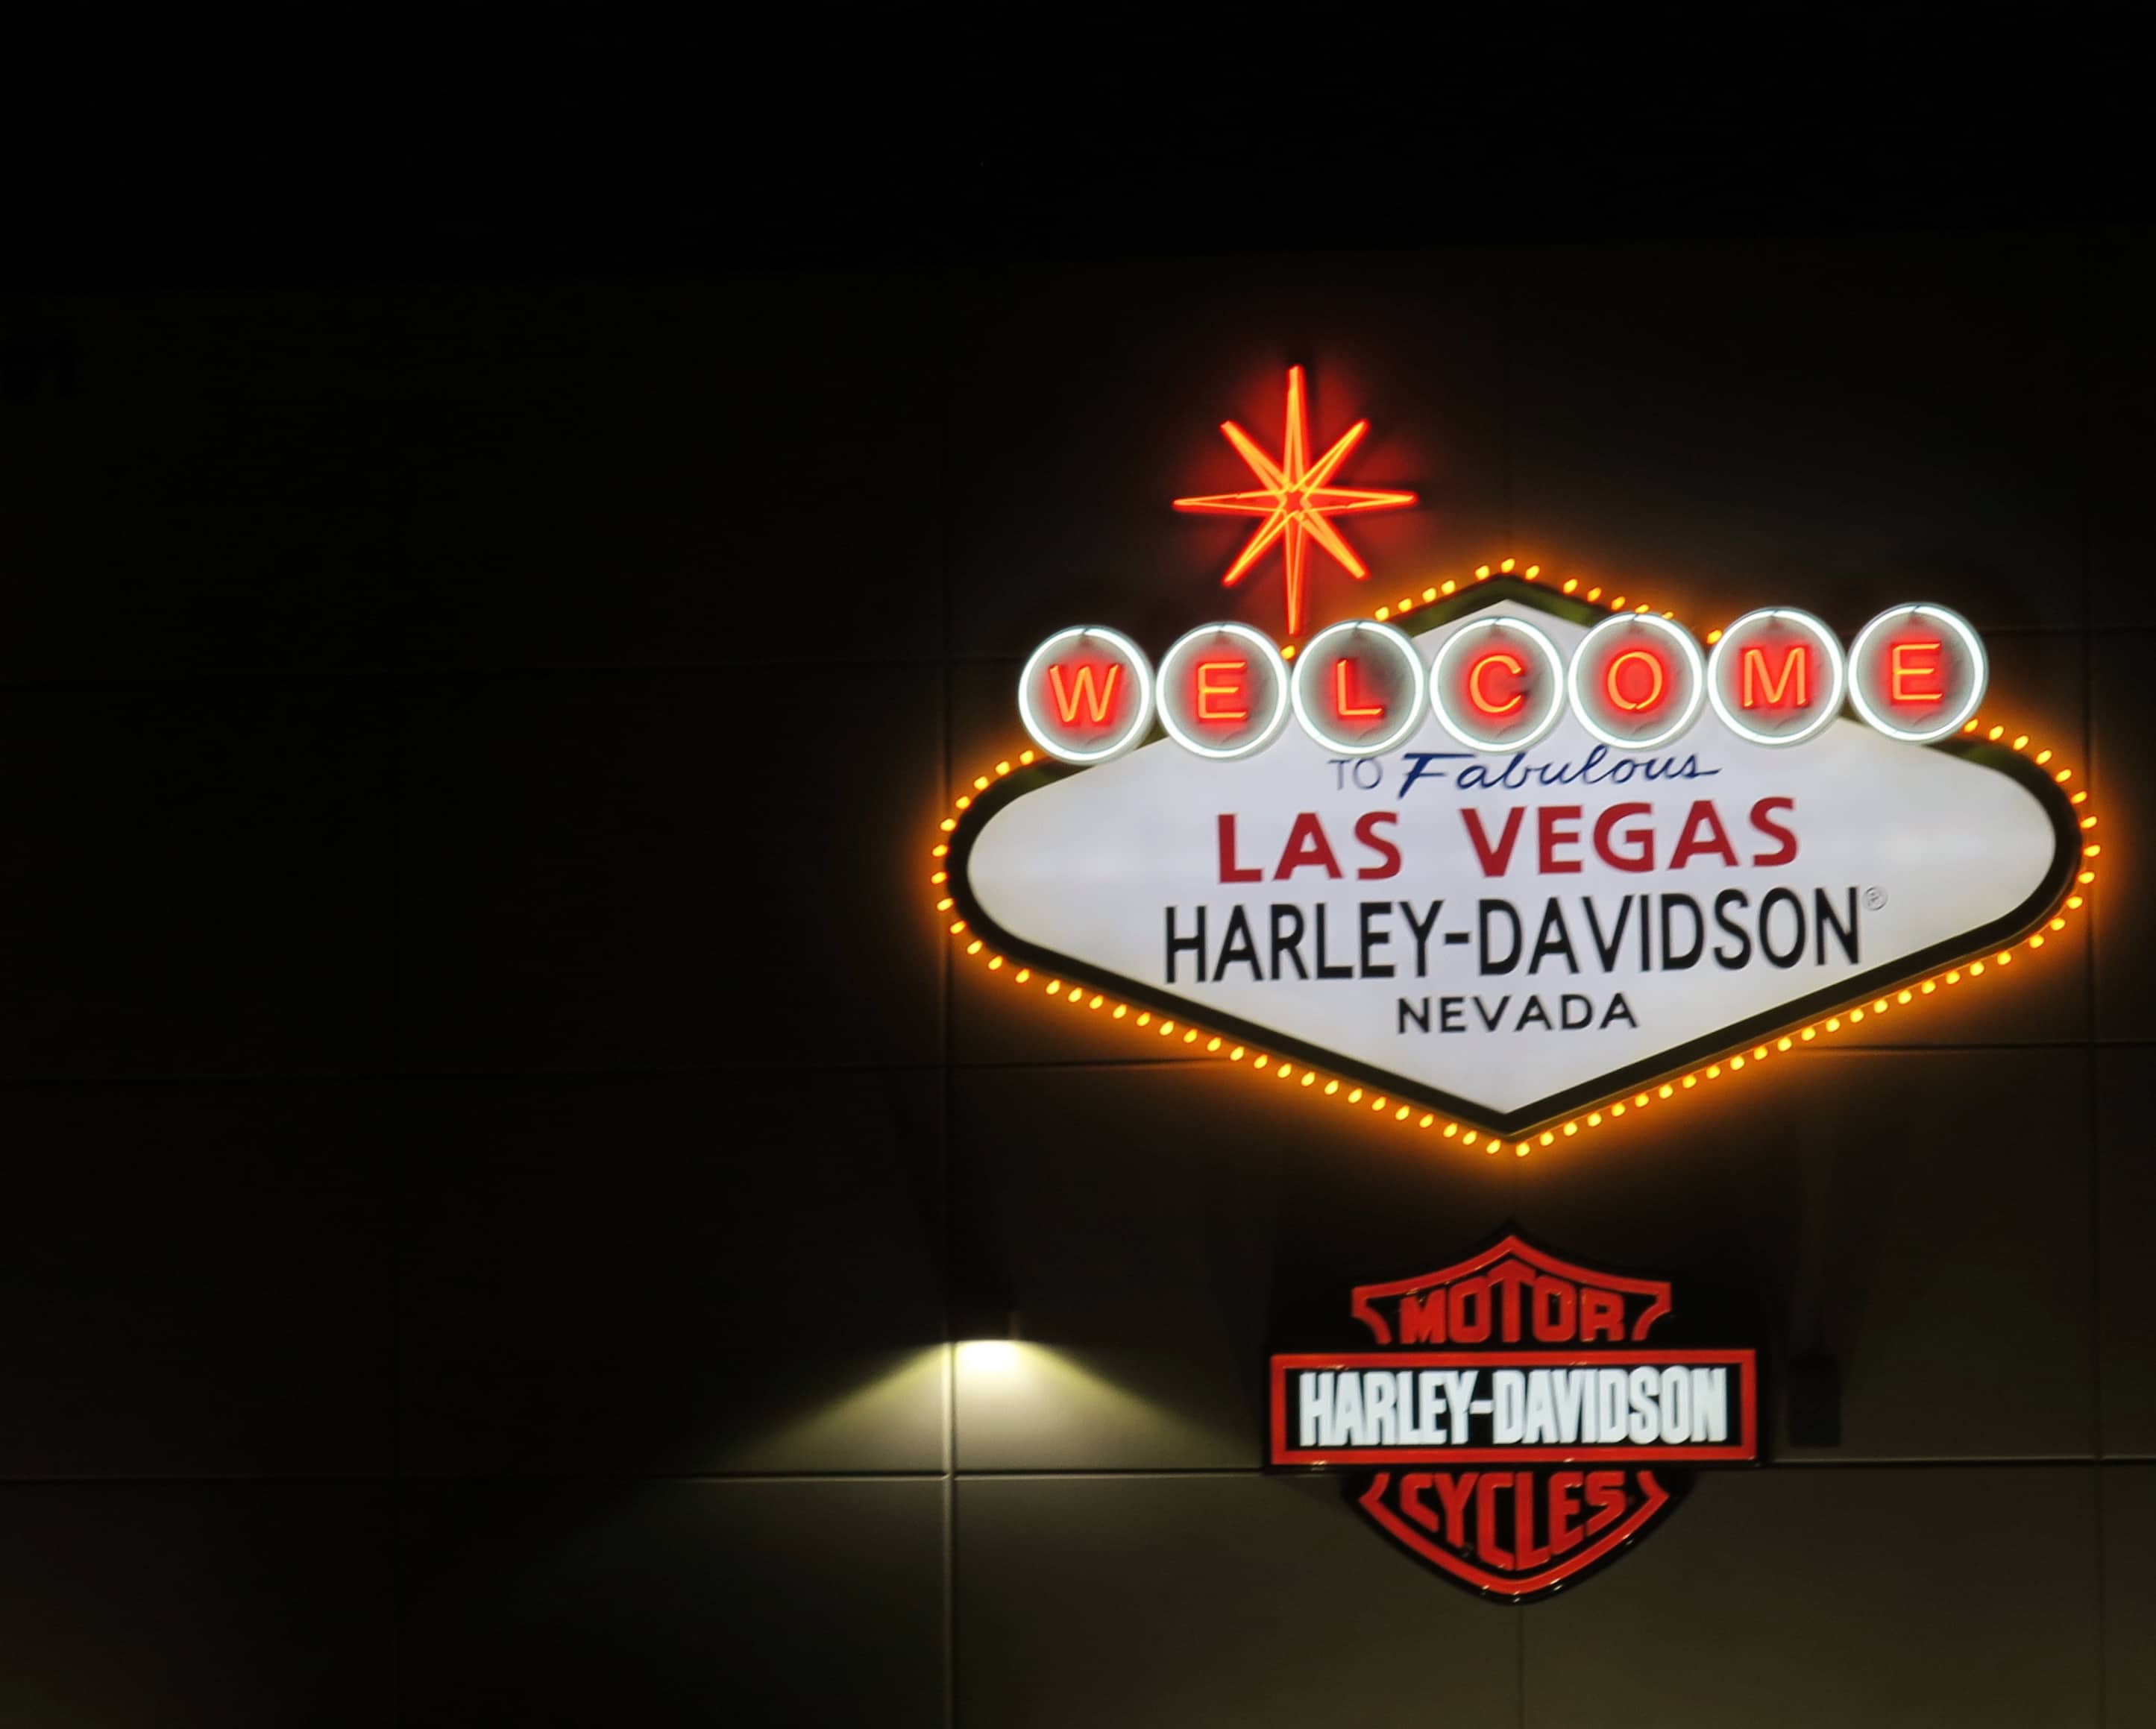 The "Welcome to Fabulous Las Vegas Harley-Davidson Nevada" Sign